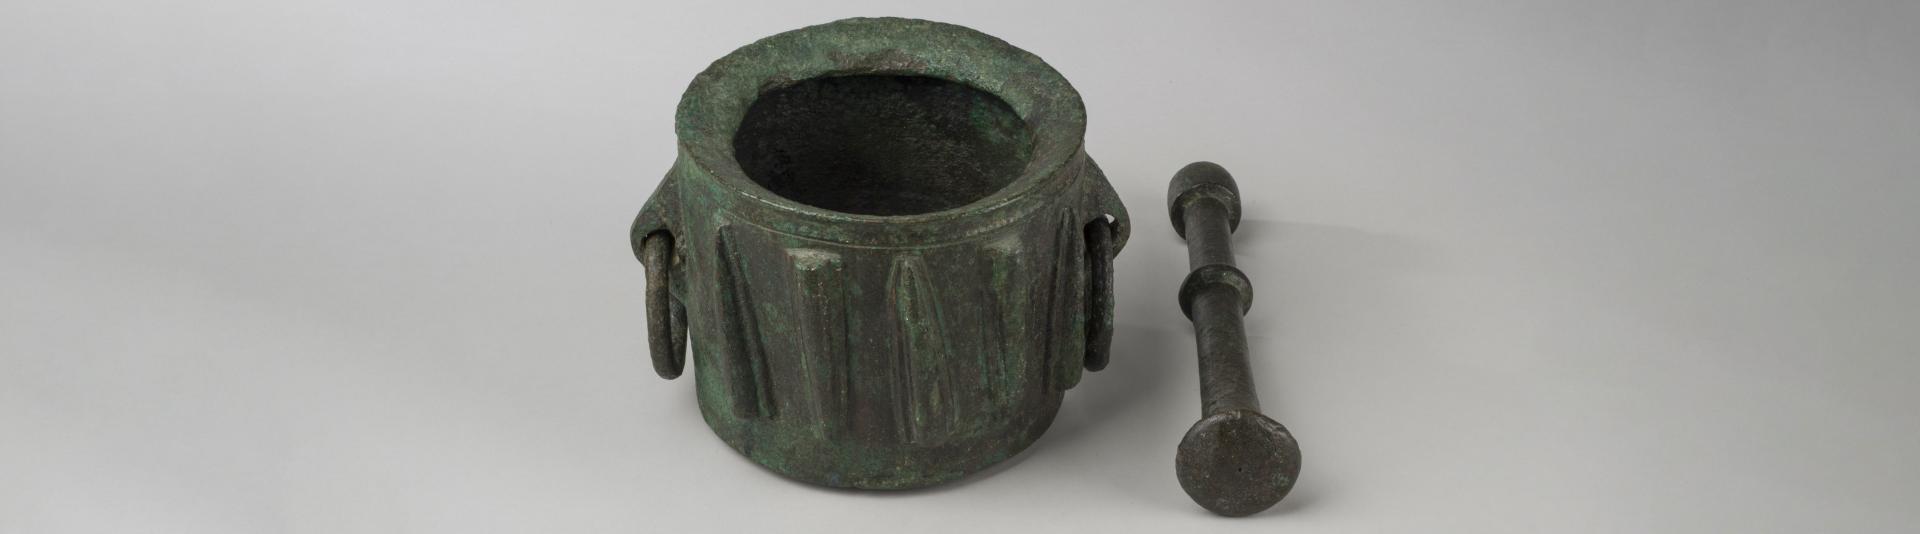 A 12th/13th century egyptian mortar that was likely used for grinding spices and herbs for food, medicine, and/or perfumes.